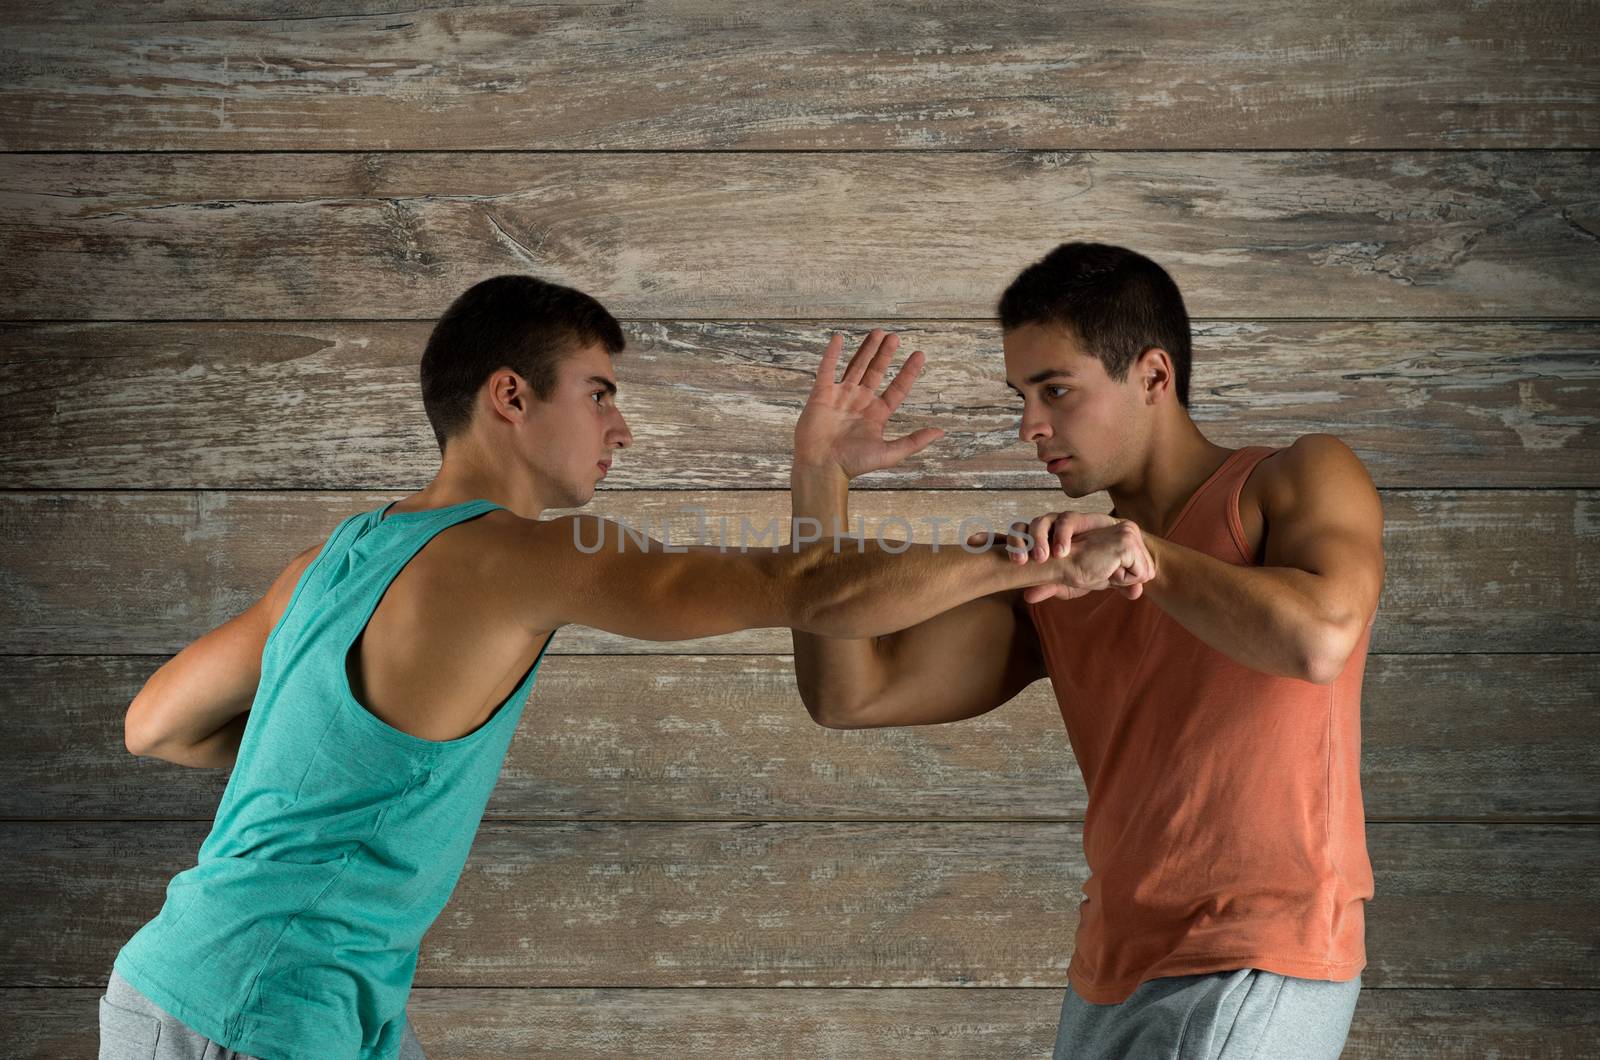 sport, competition, strength and people concept - young men fighting hand-to-hand over wooden wall background